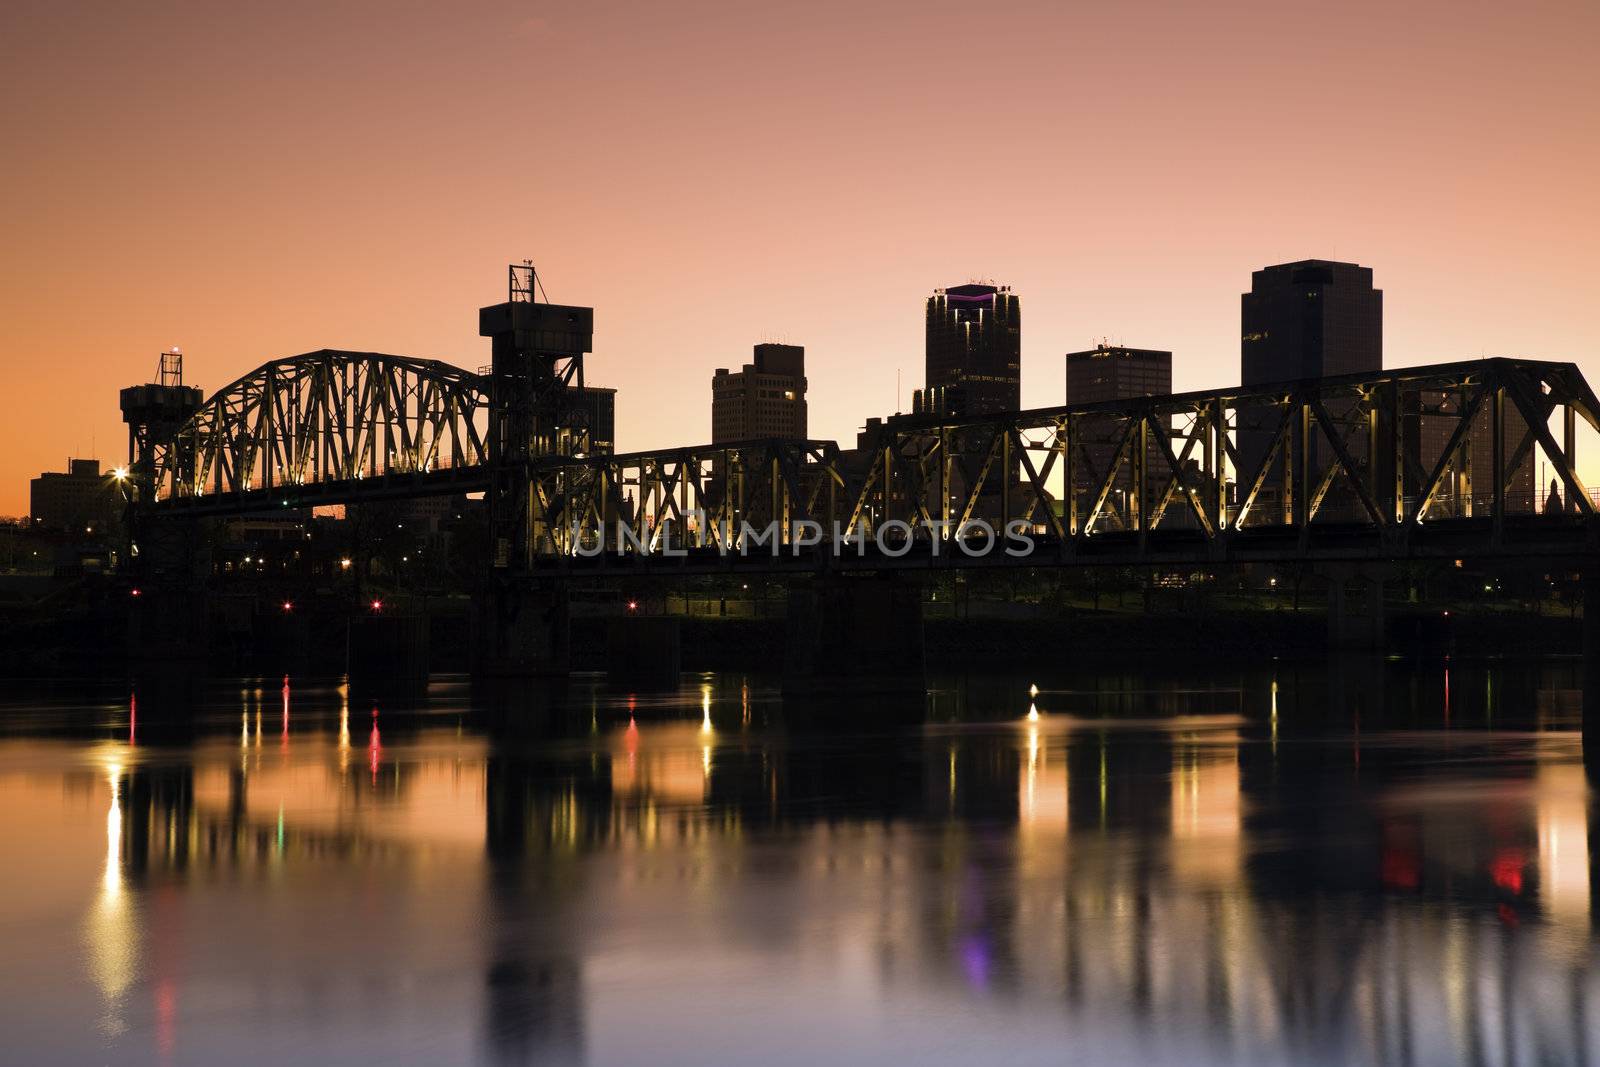 Sunset in Little Rock, Arkansas. Blurred barque in the foreground.